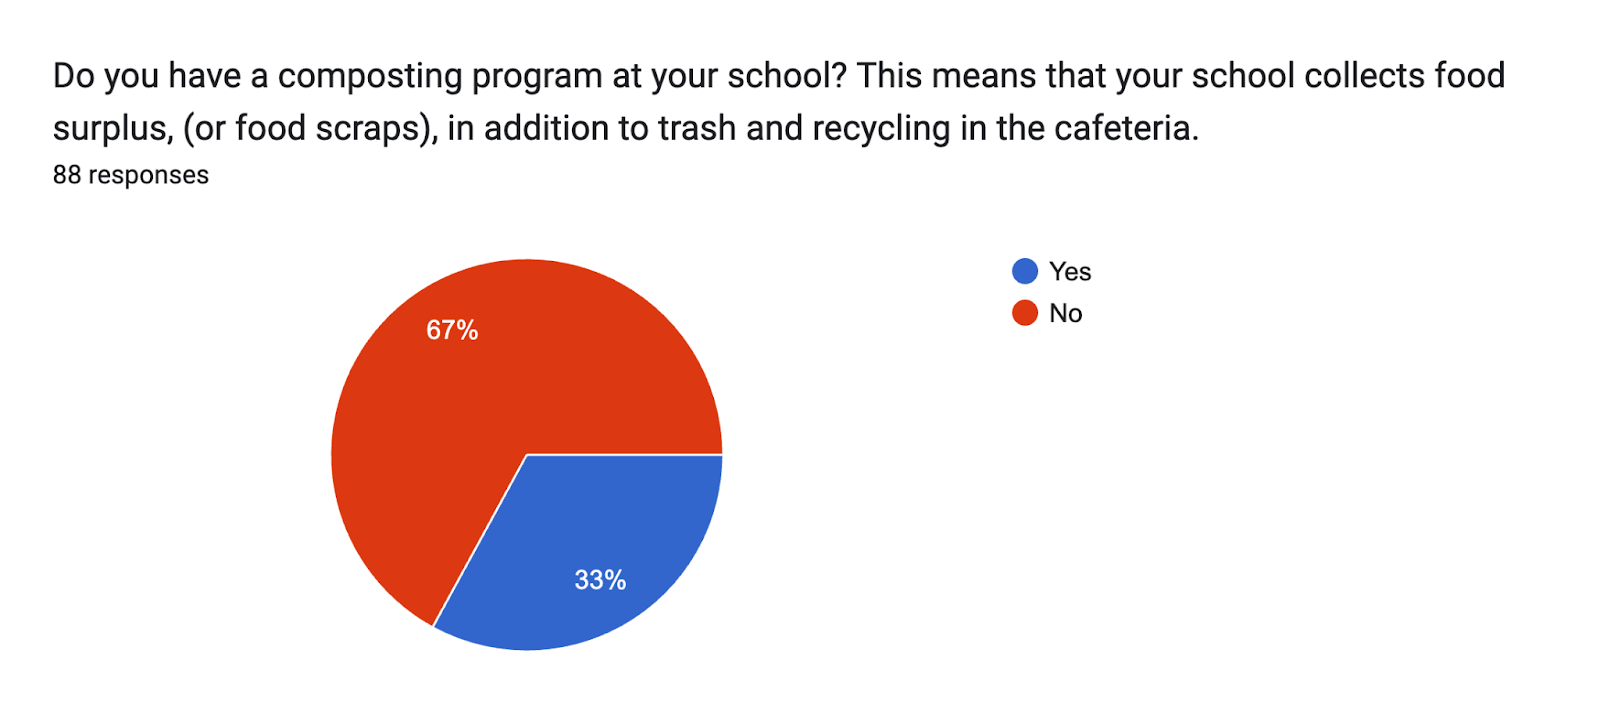 Forms response chart. Question title: Do you have a composting program at your school? This means that your school collects food surplus, (or food scraps), in addition to trash and recycling in the cafeteria.. Number of responses: 88 responses.